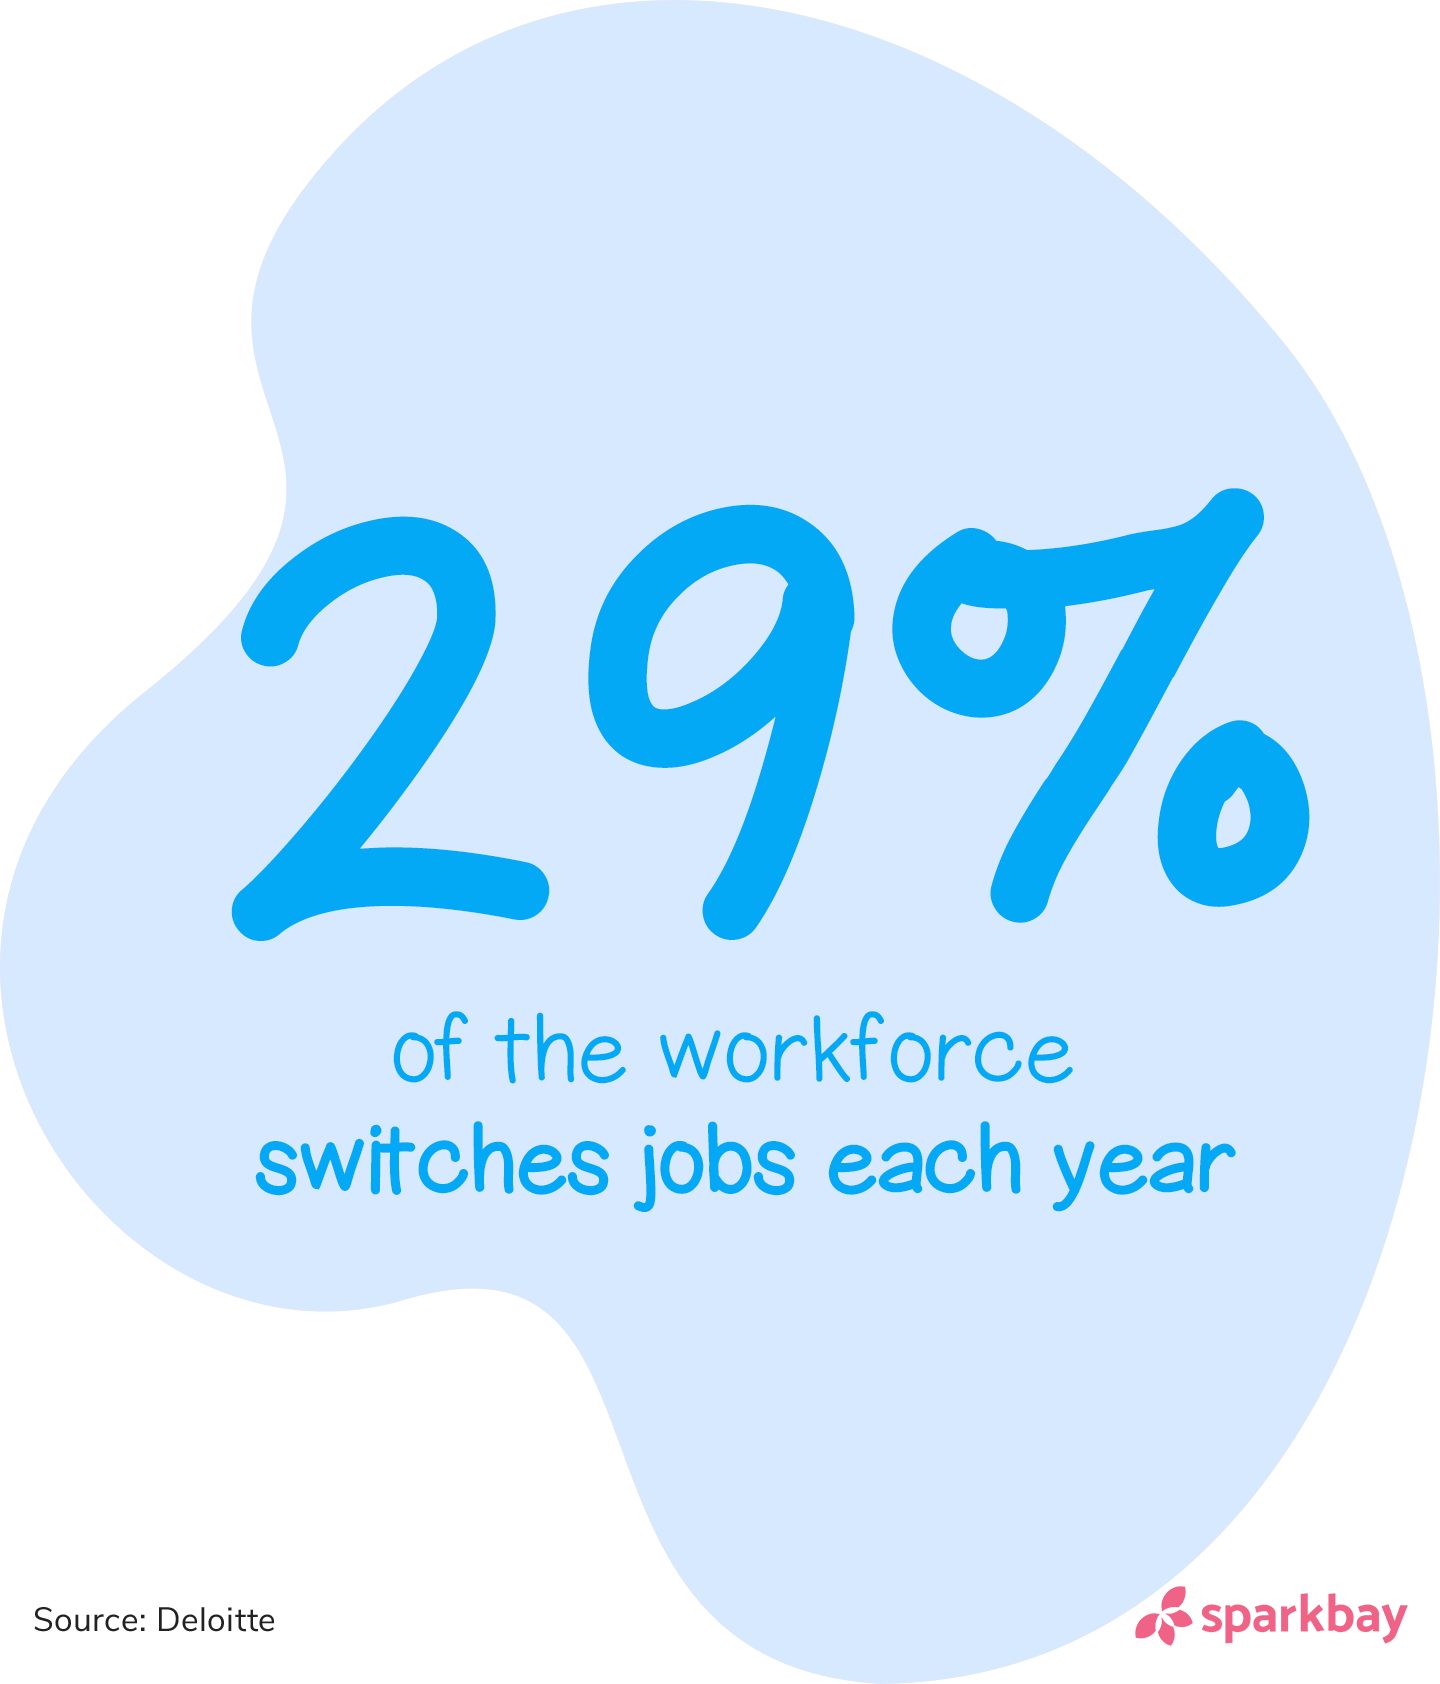 Employee turnover statistics: 25% of the workforce switches jobs each year.